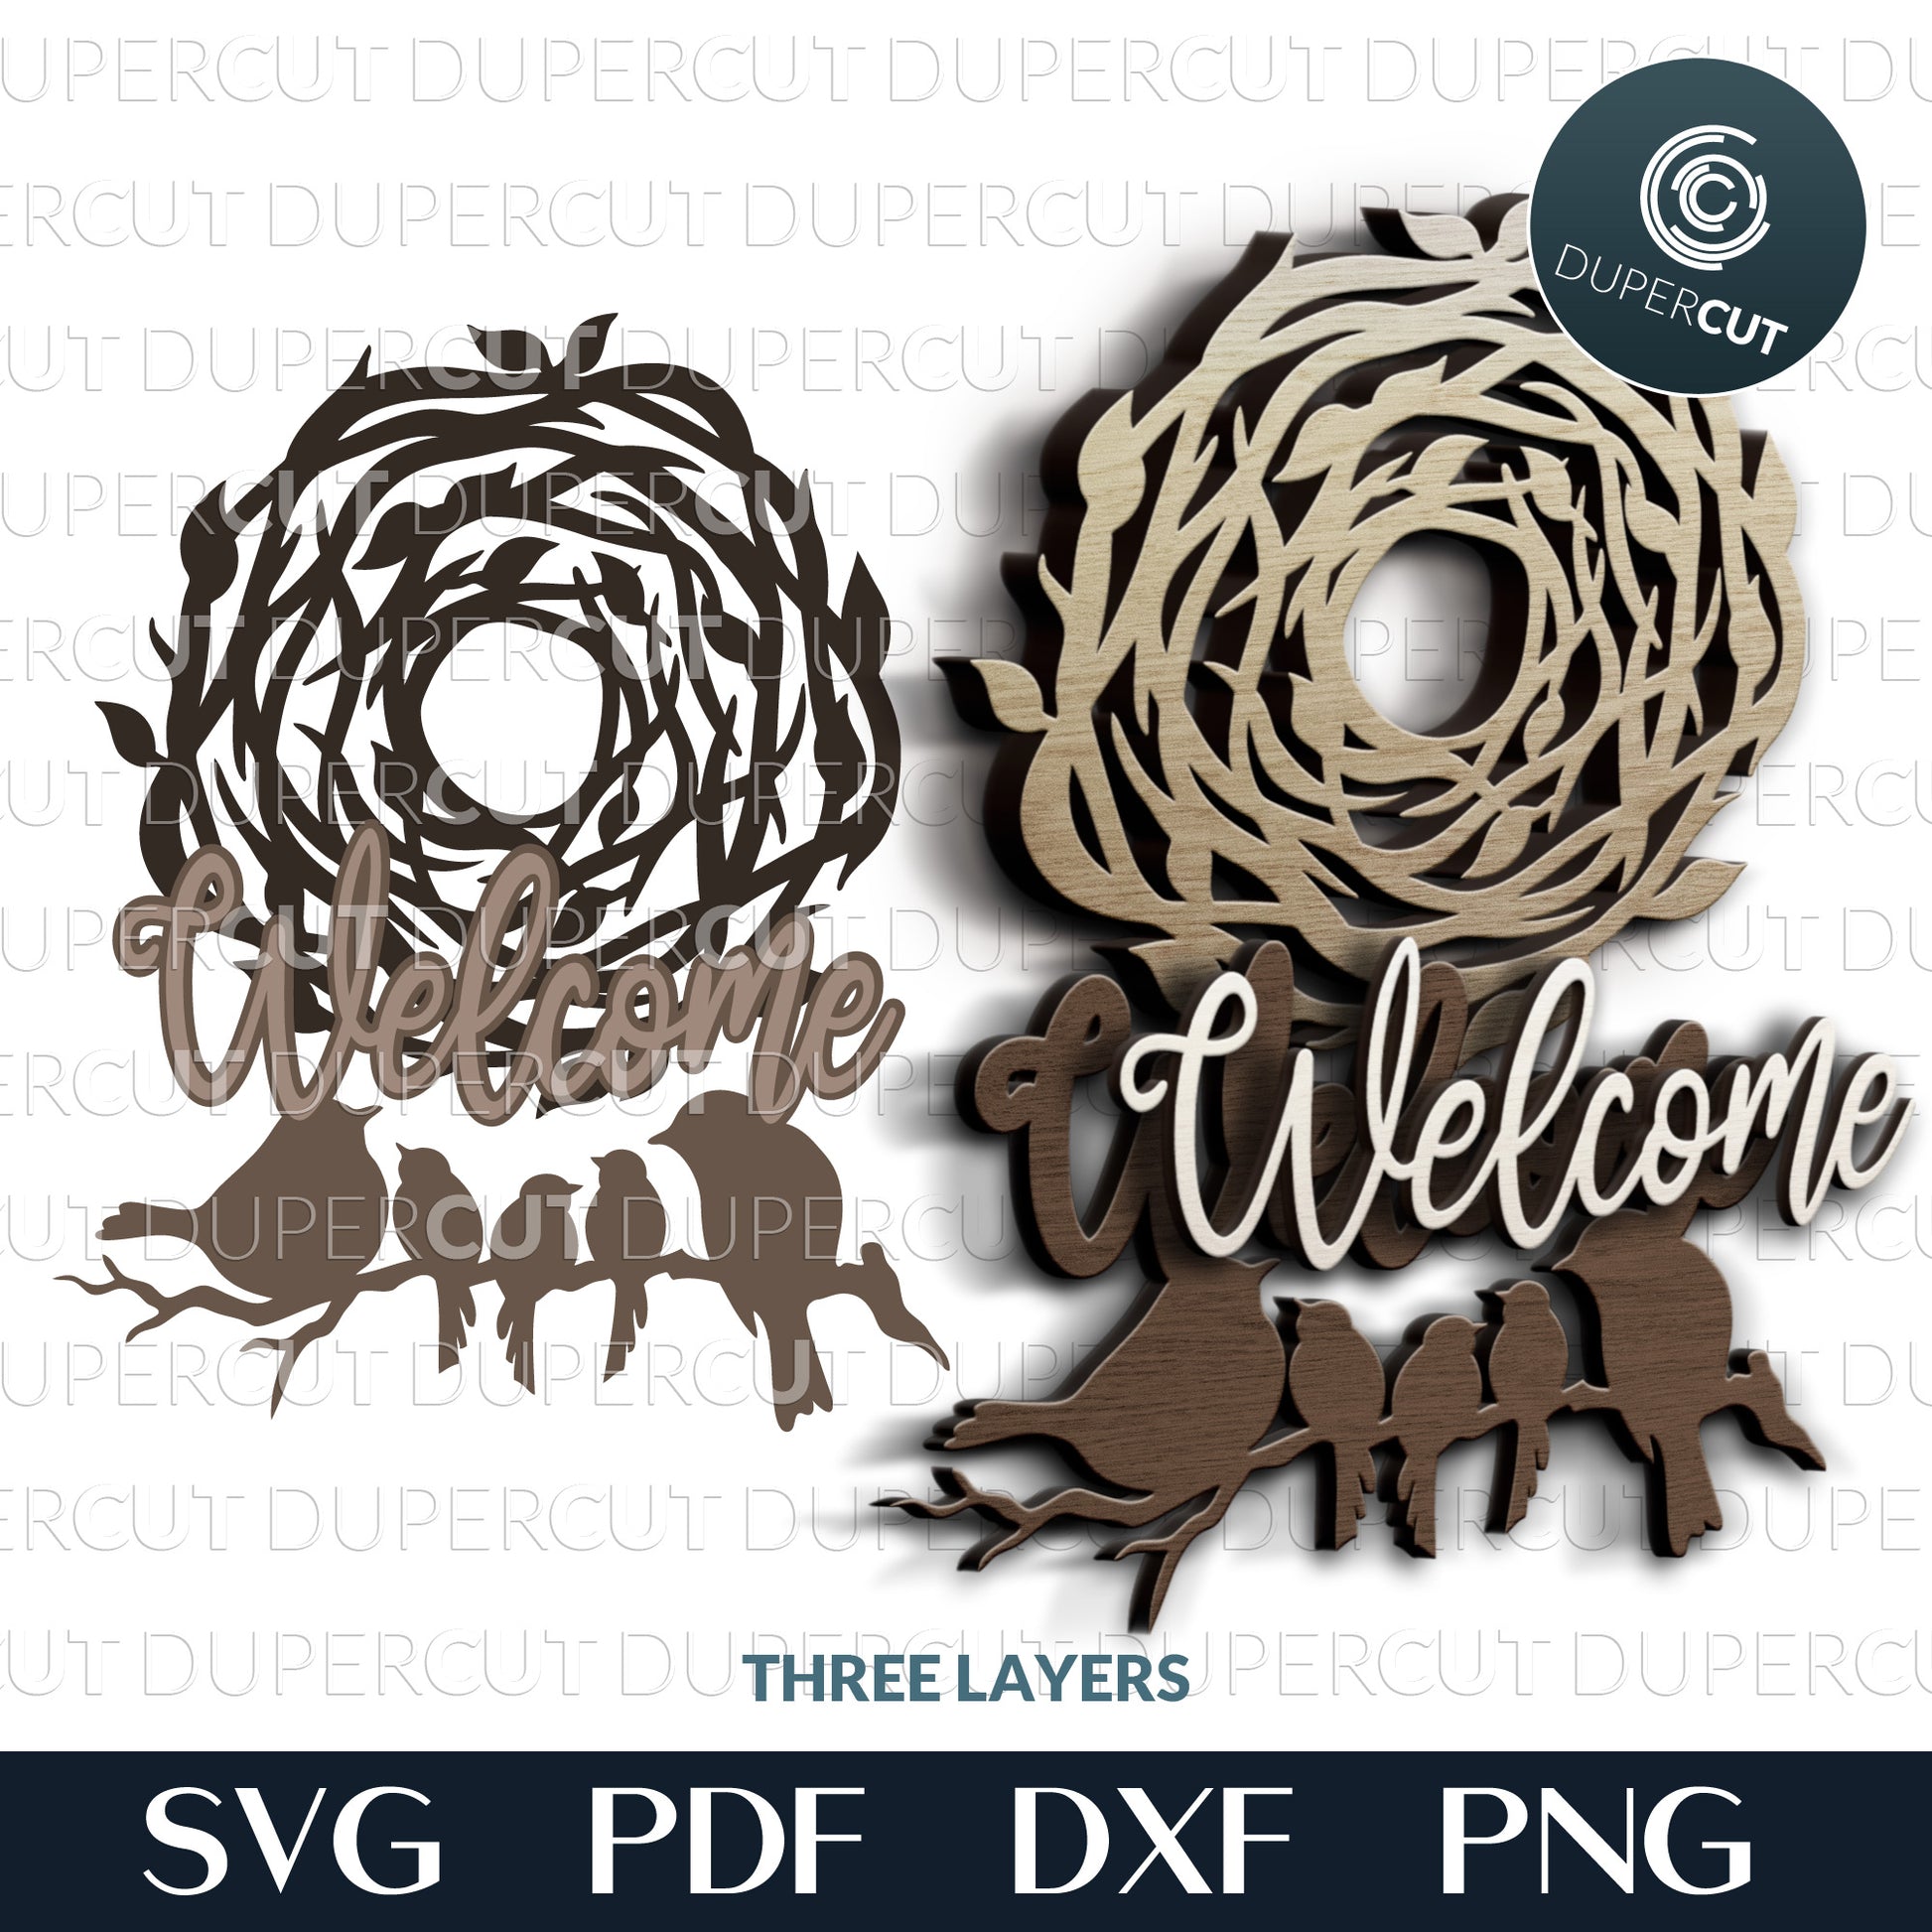 Birds silhouettes Family nest welcome sign - SVG PDF DXF layered cutting files for laser machines, Glowforge, Cricut, Silhouette cameo, CNC plasma